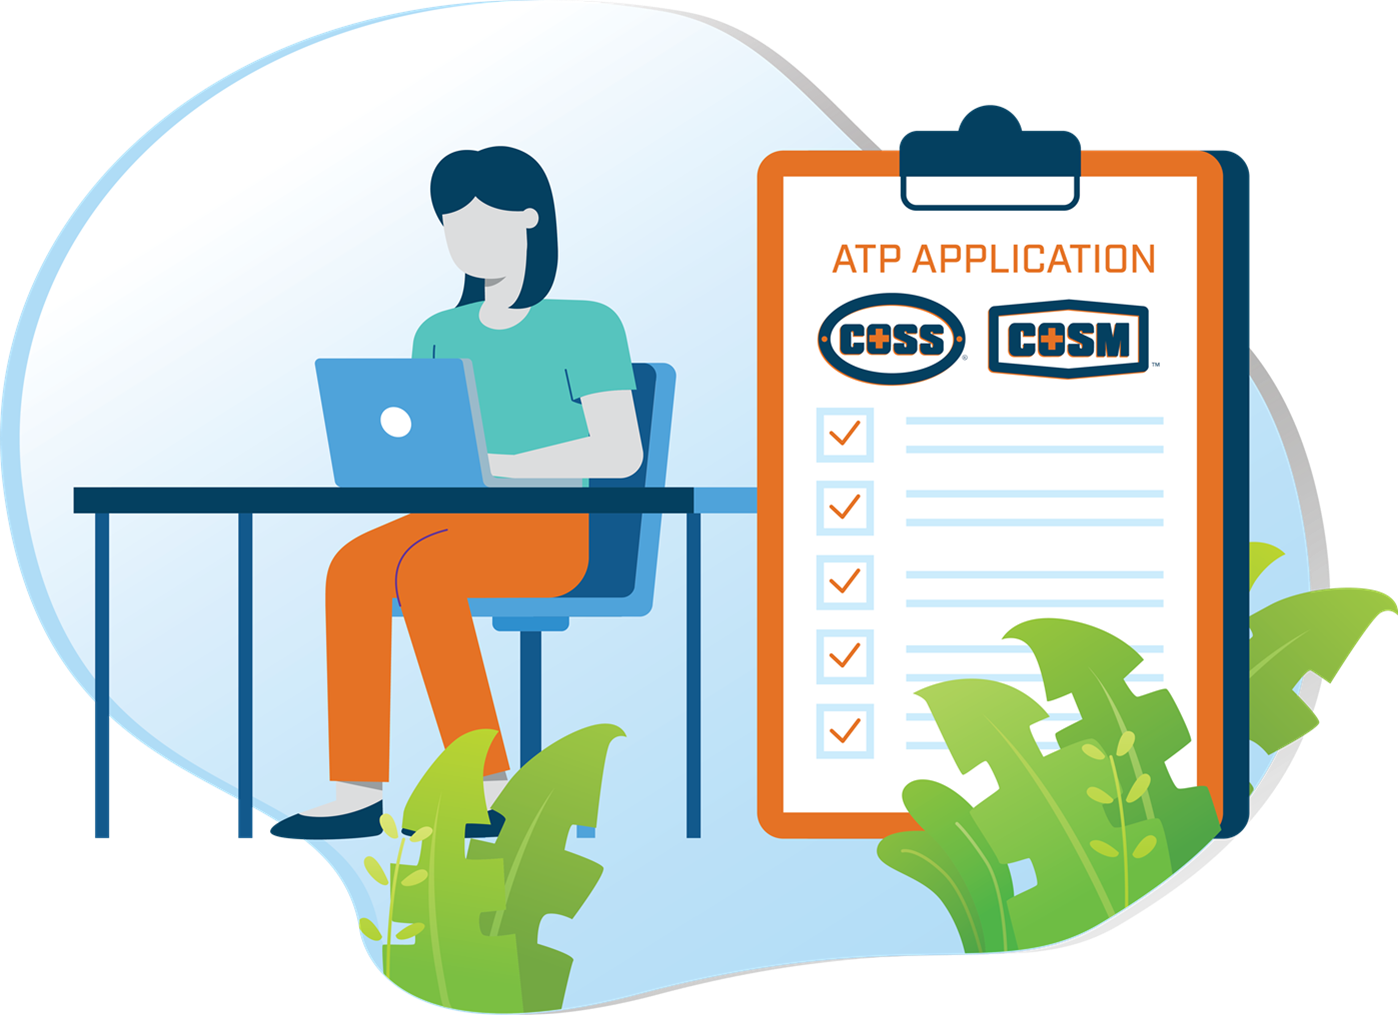 Complete an ATP application